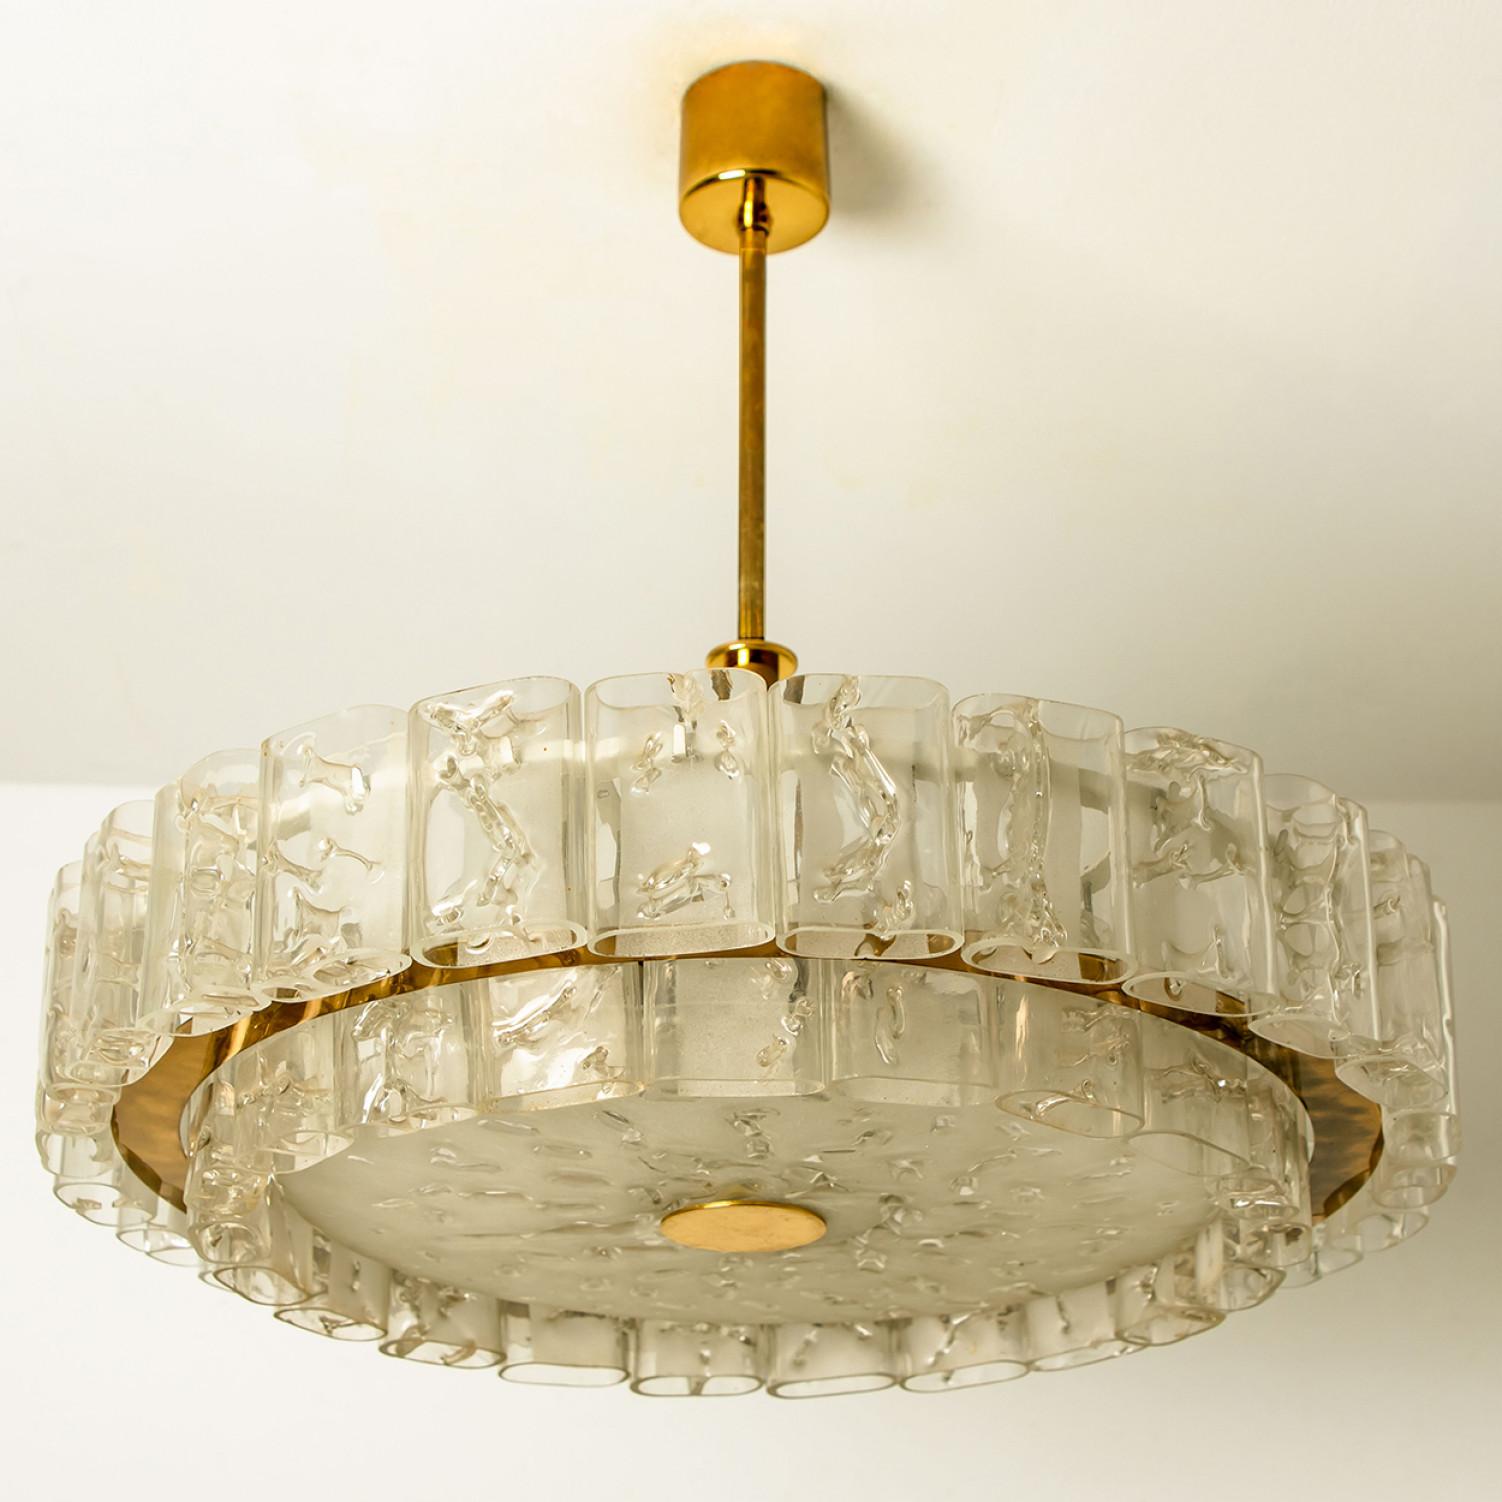 A gorgeous hand blown, oval shaped, glass pendant by Doria Leuchten from the 1970s. The pendant consists of 2 layers with several hand blown textured oval shaped glass tubes mounted on a brass frame arranged in concentric rings.

This pendant is